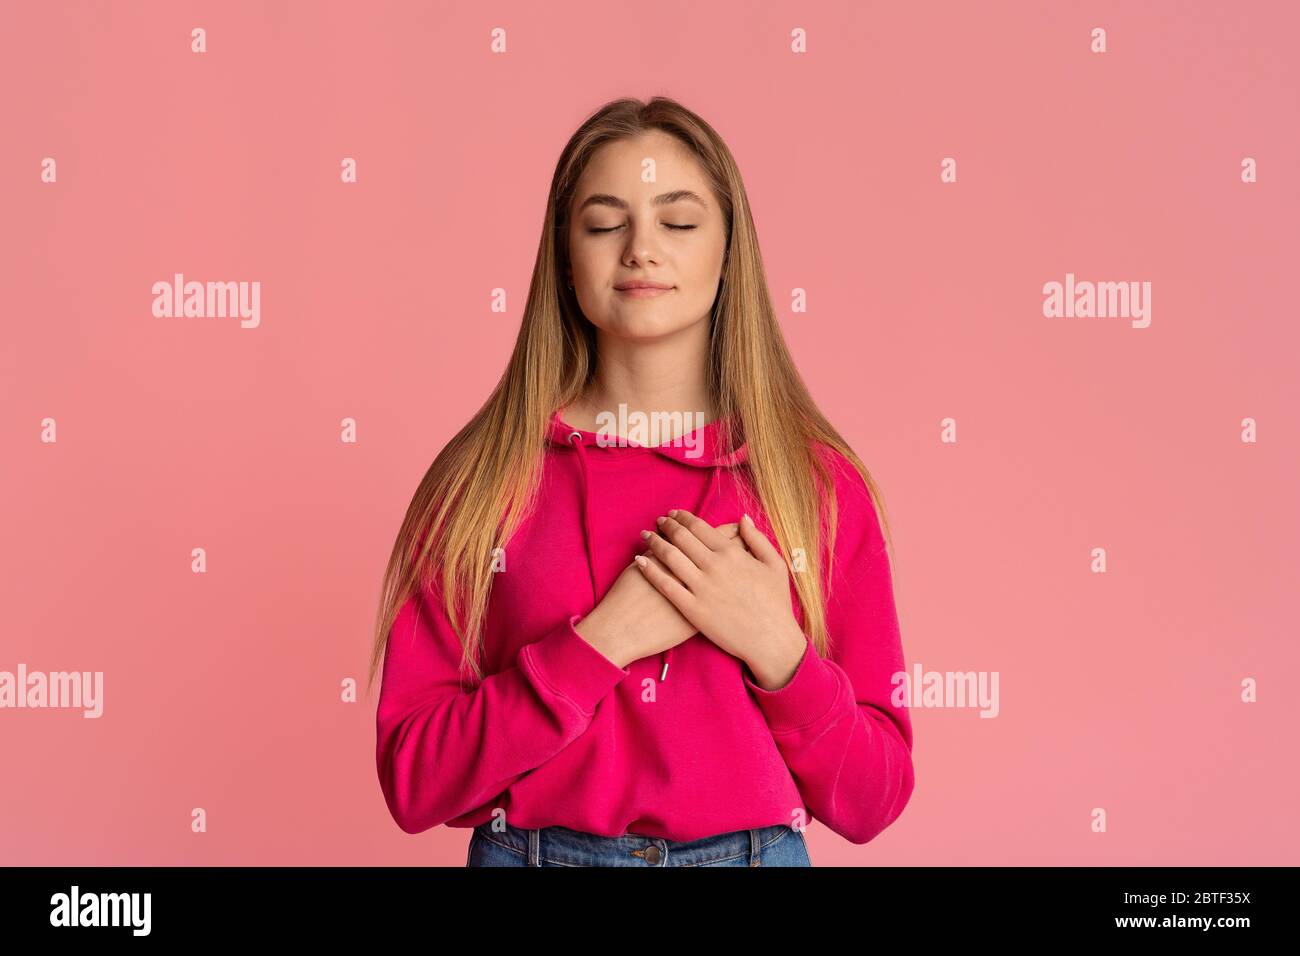 Cute girl tenager with closed eyes presses her hands to heart Stock Photo